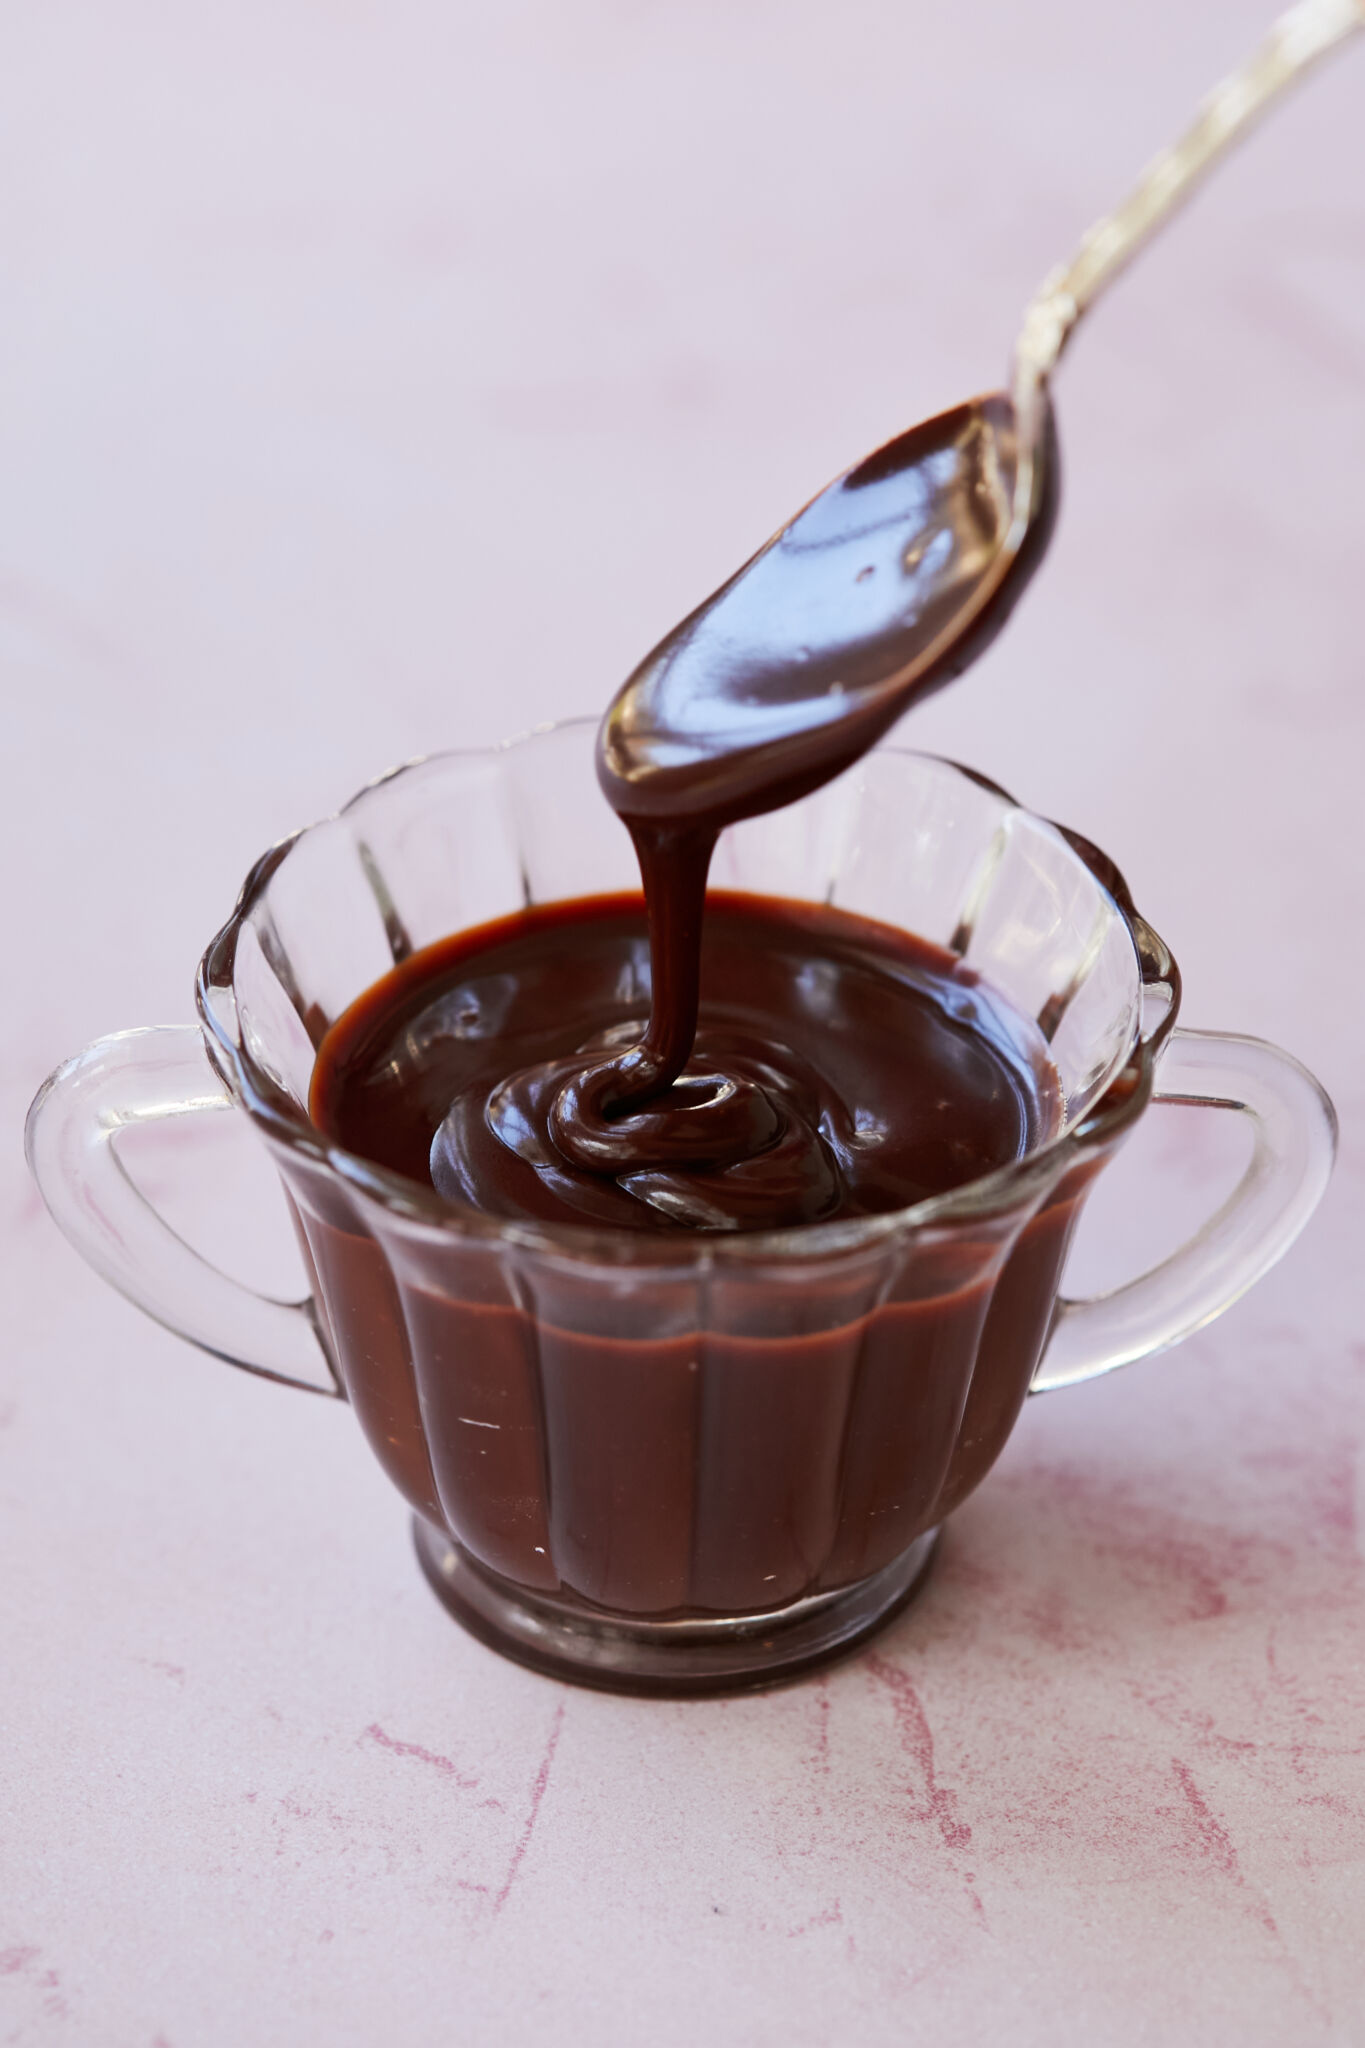 Silky smooth Chocolate caramel sauce is dripping from a spoon into a glass bowl with two handles. 